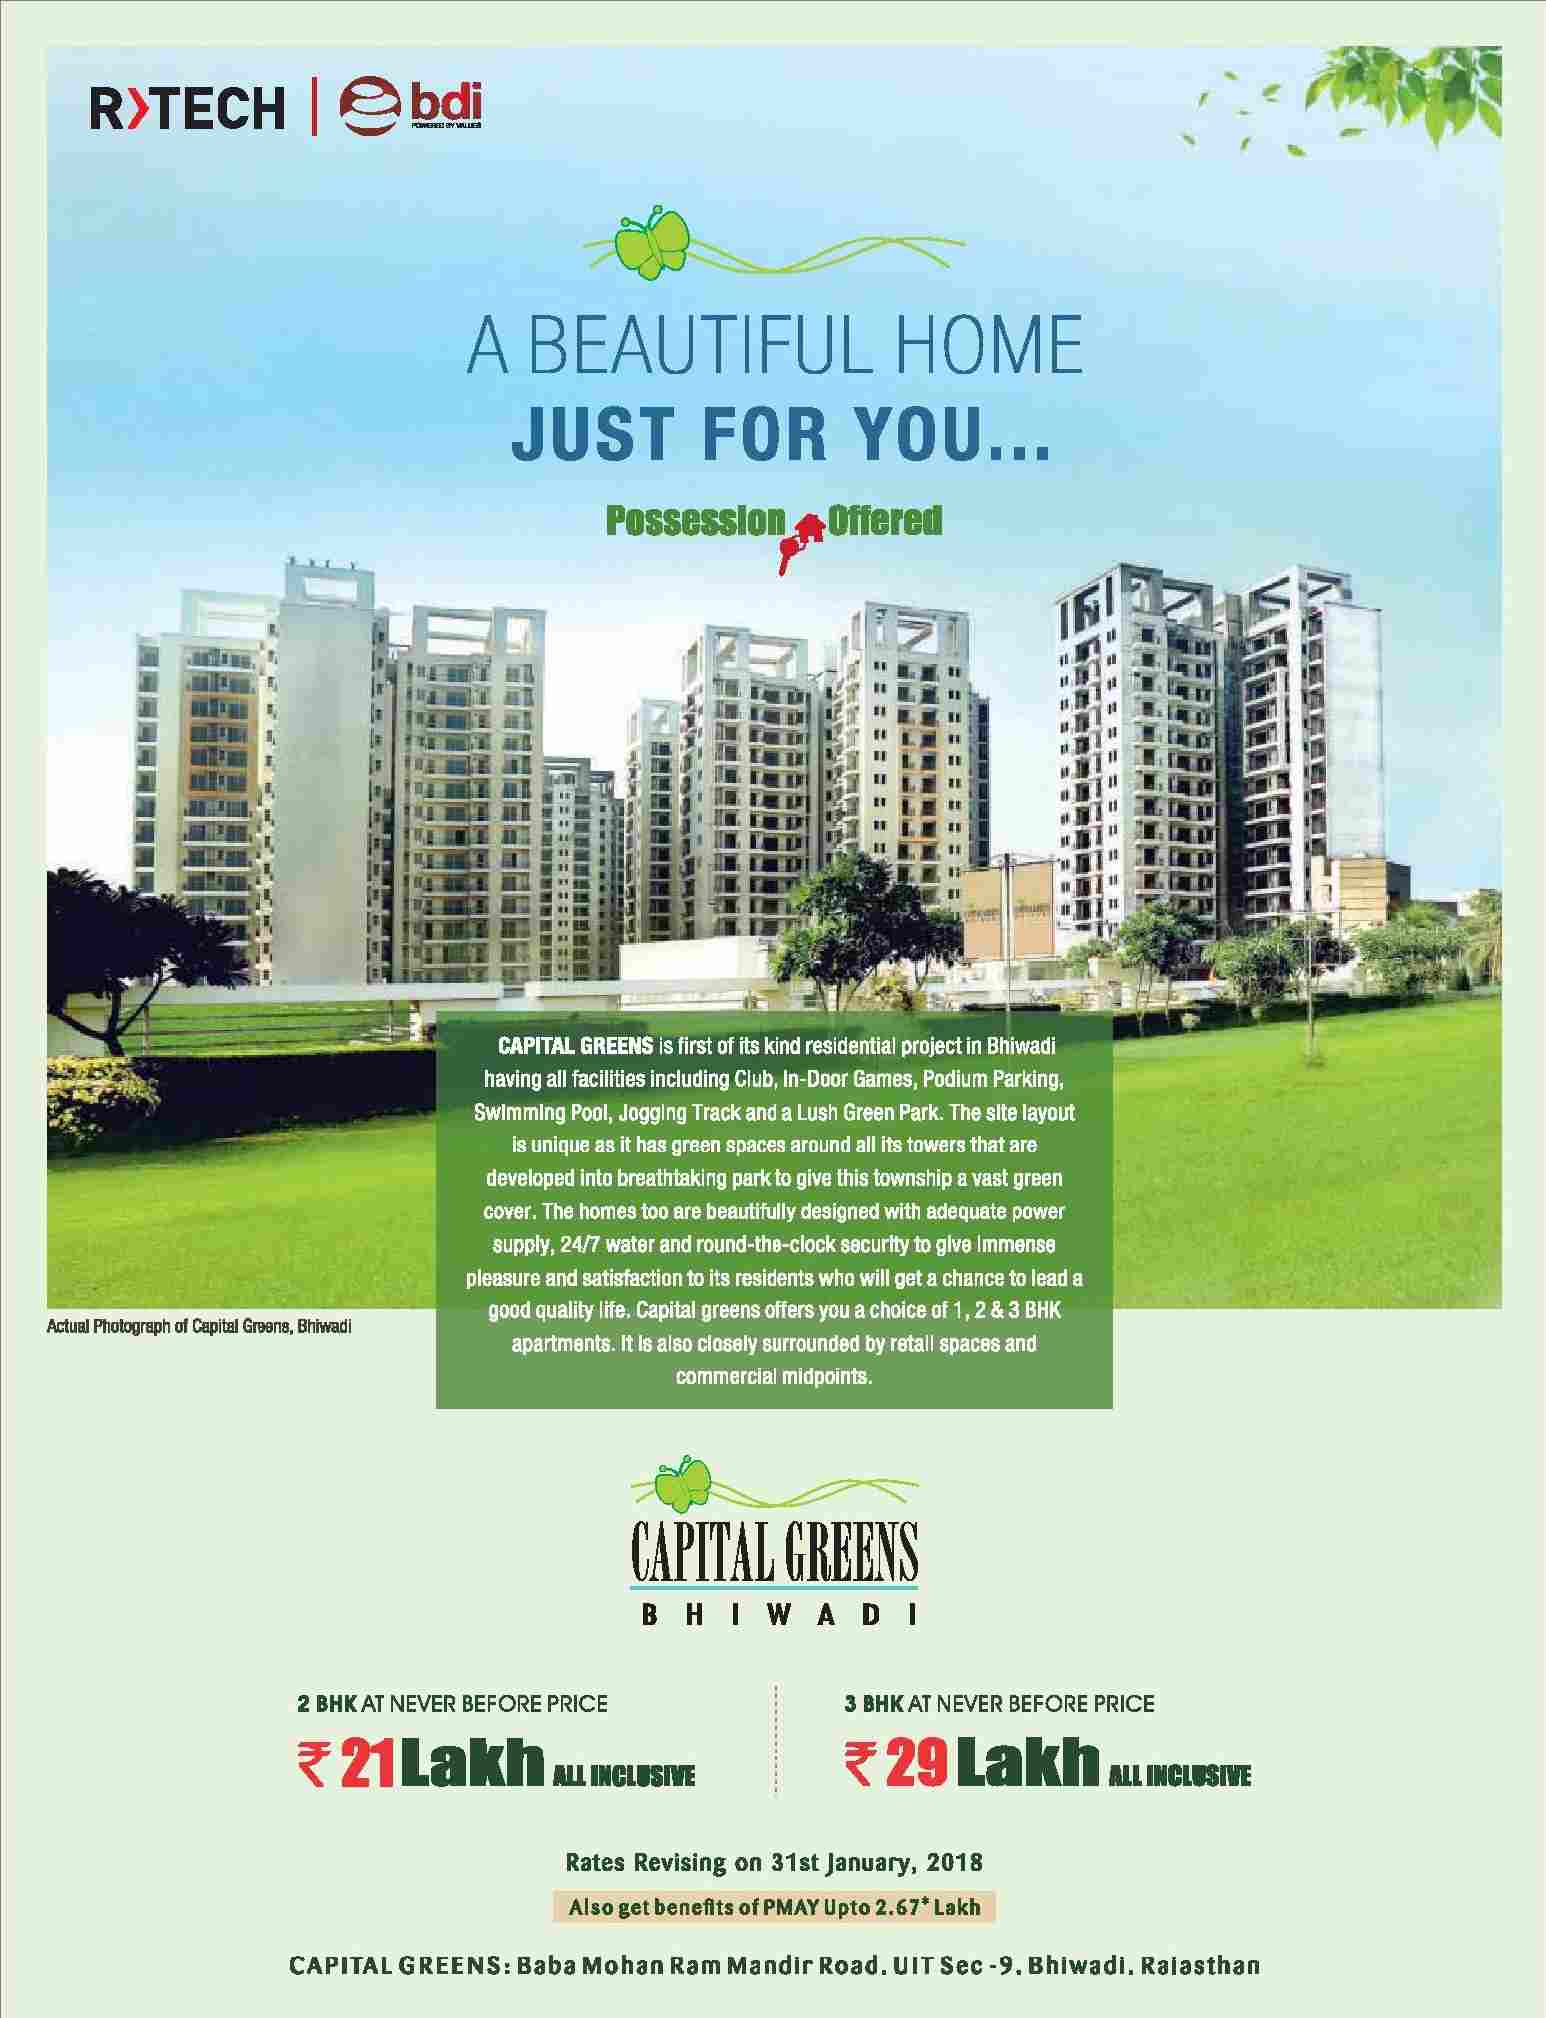 Live in a beautiful home just for you at R Tech Capital Greens in Bhiwadi Update